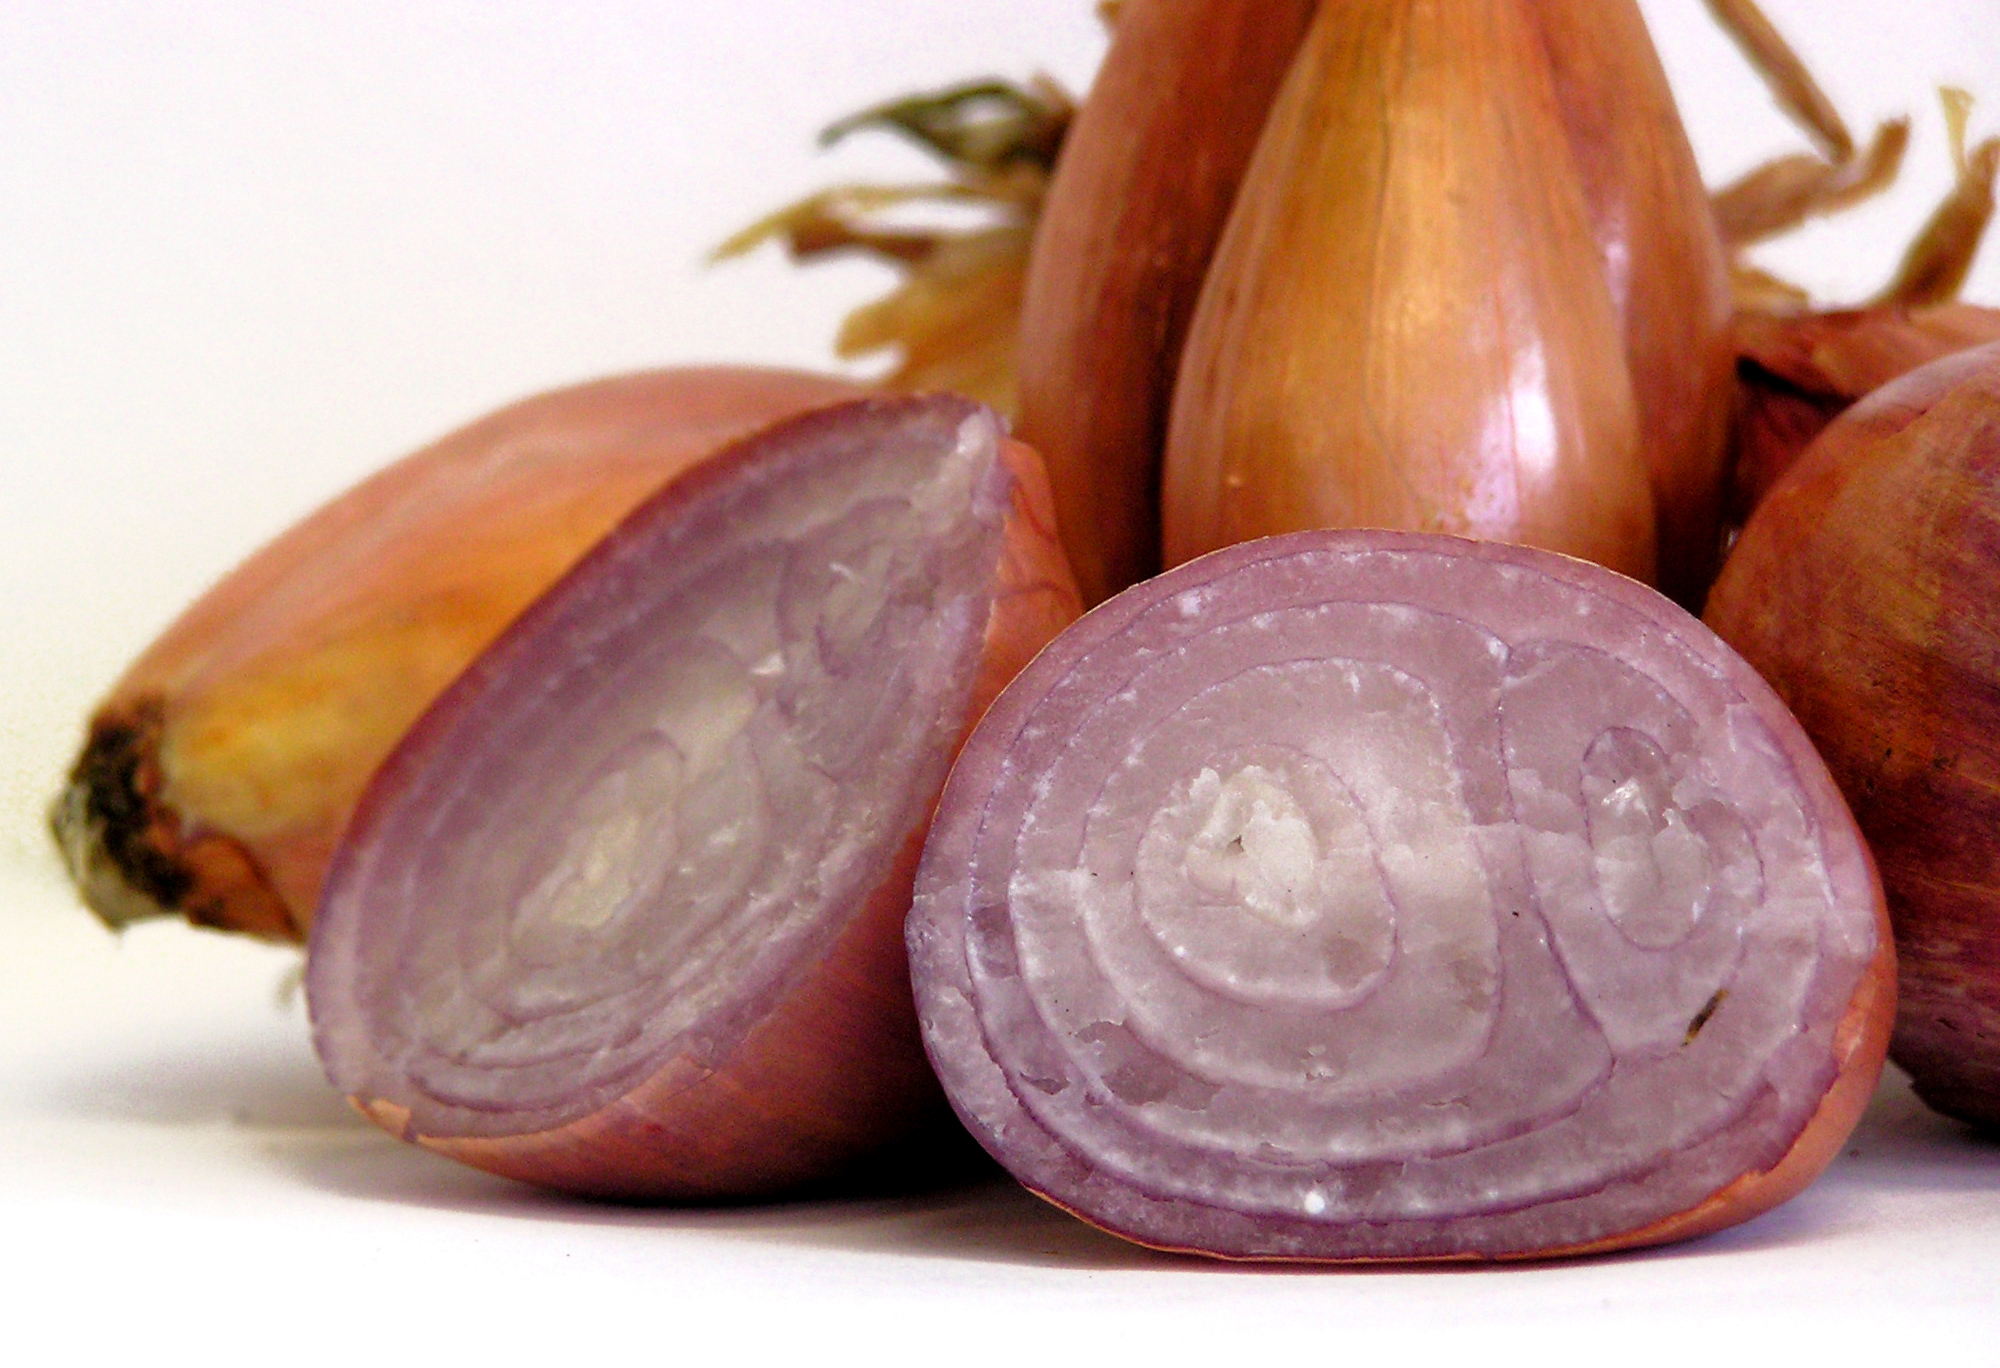 Shallots - part of the aggregate group of onions